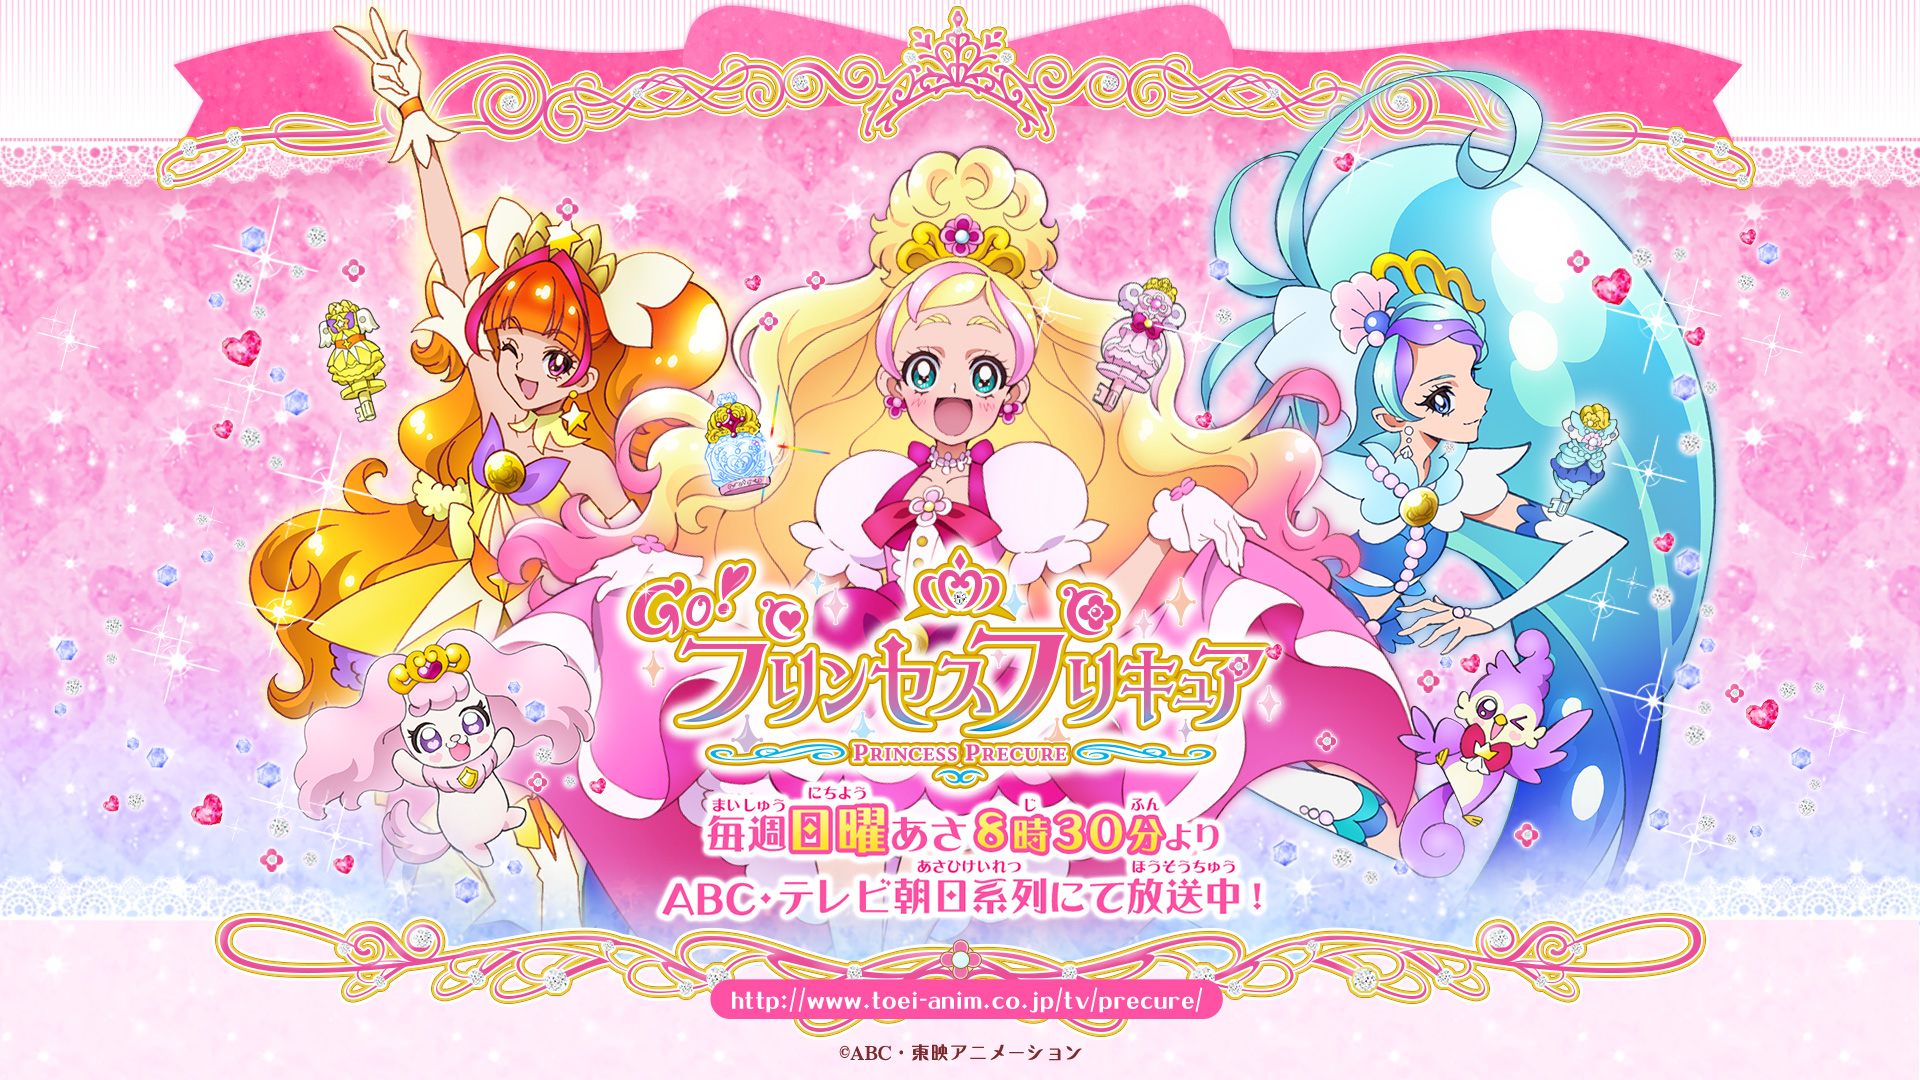 Pretty Cure! Wallpapers